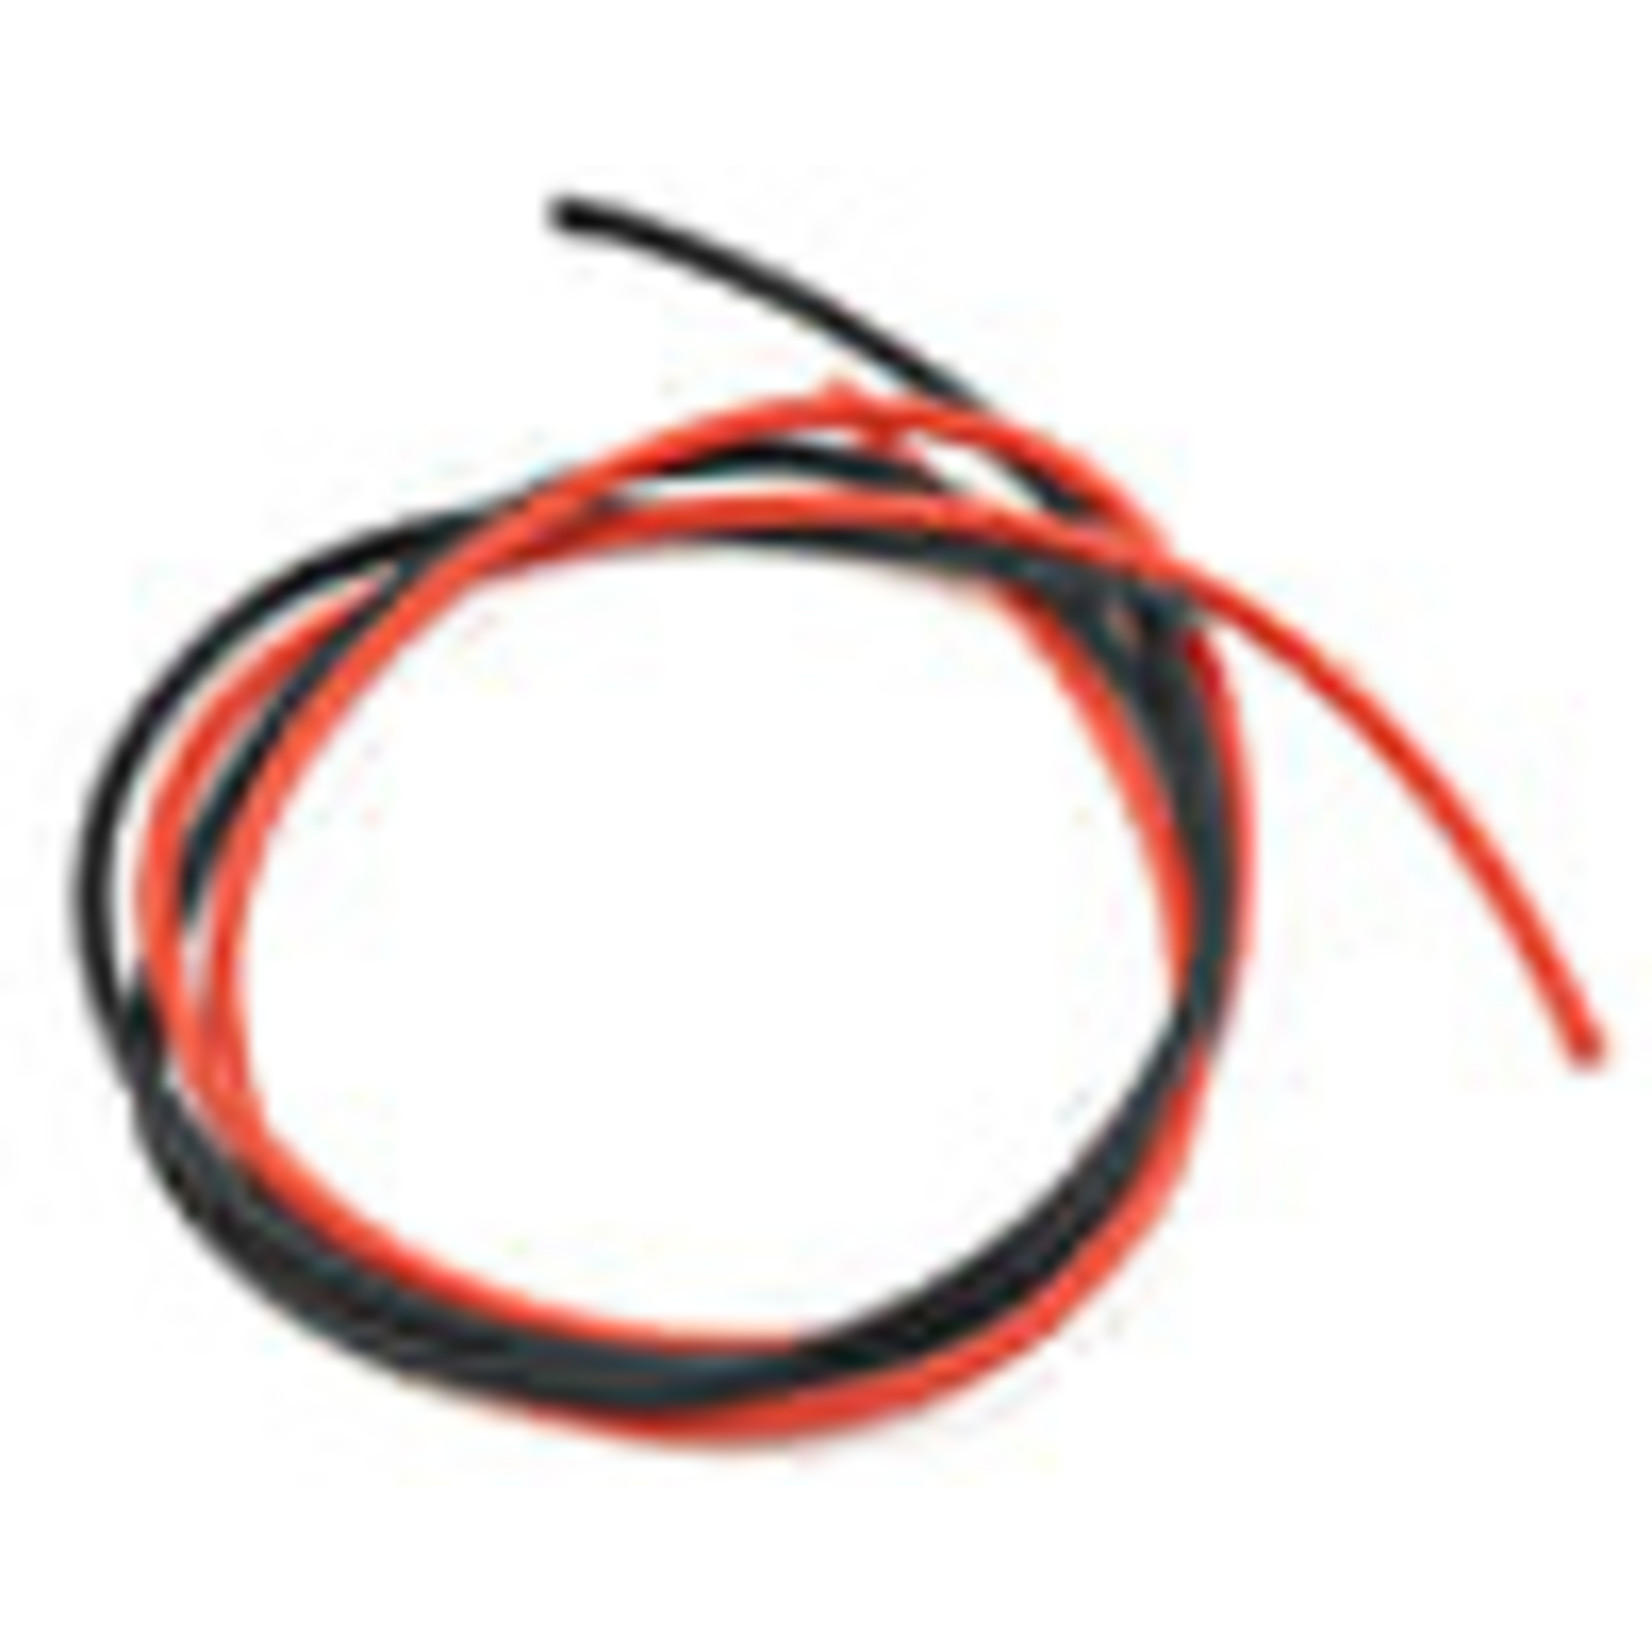 Protek R/C ProTek RC 16awg Red & Black Silicone Wire (2ft/610mm)